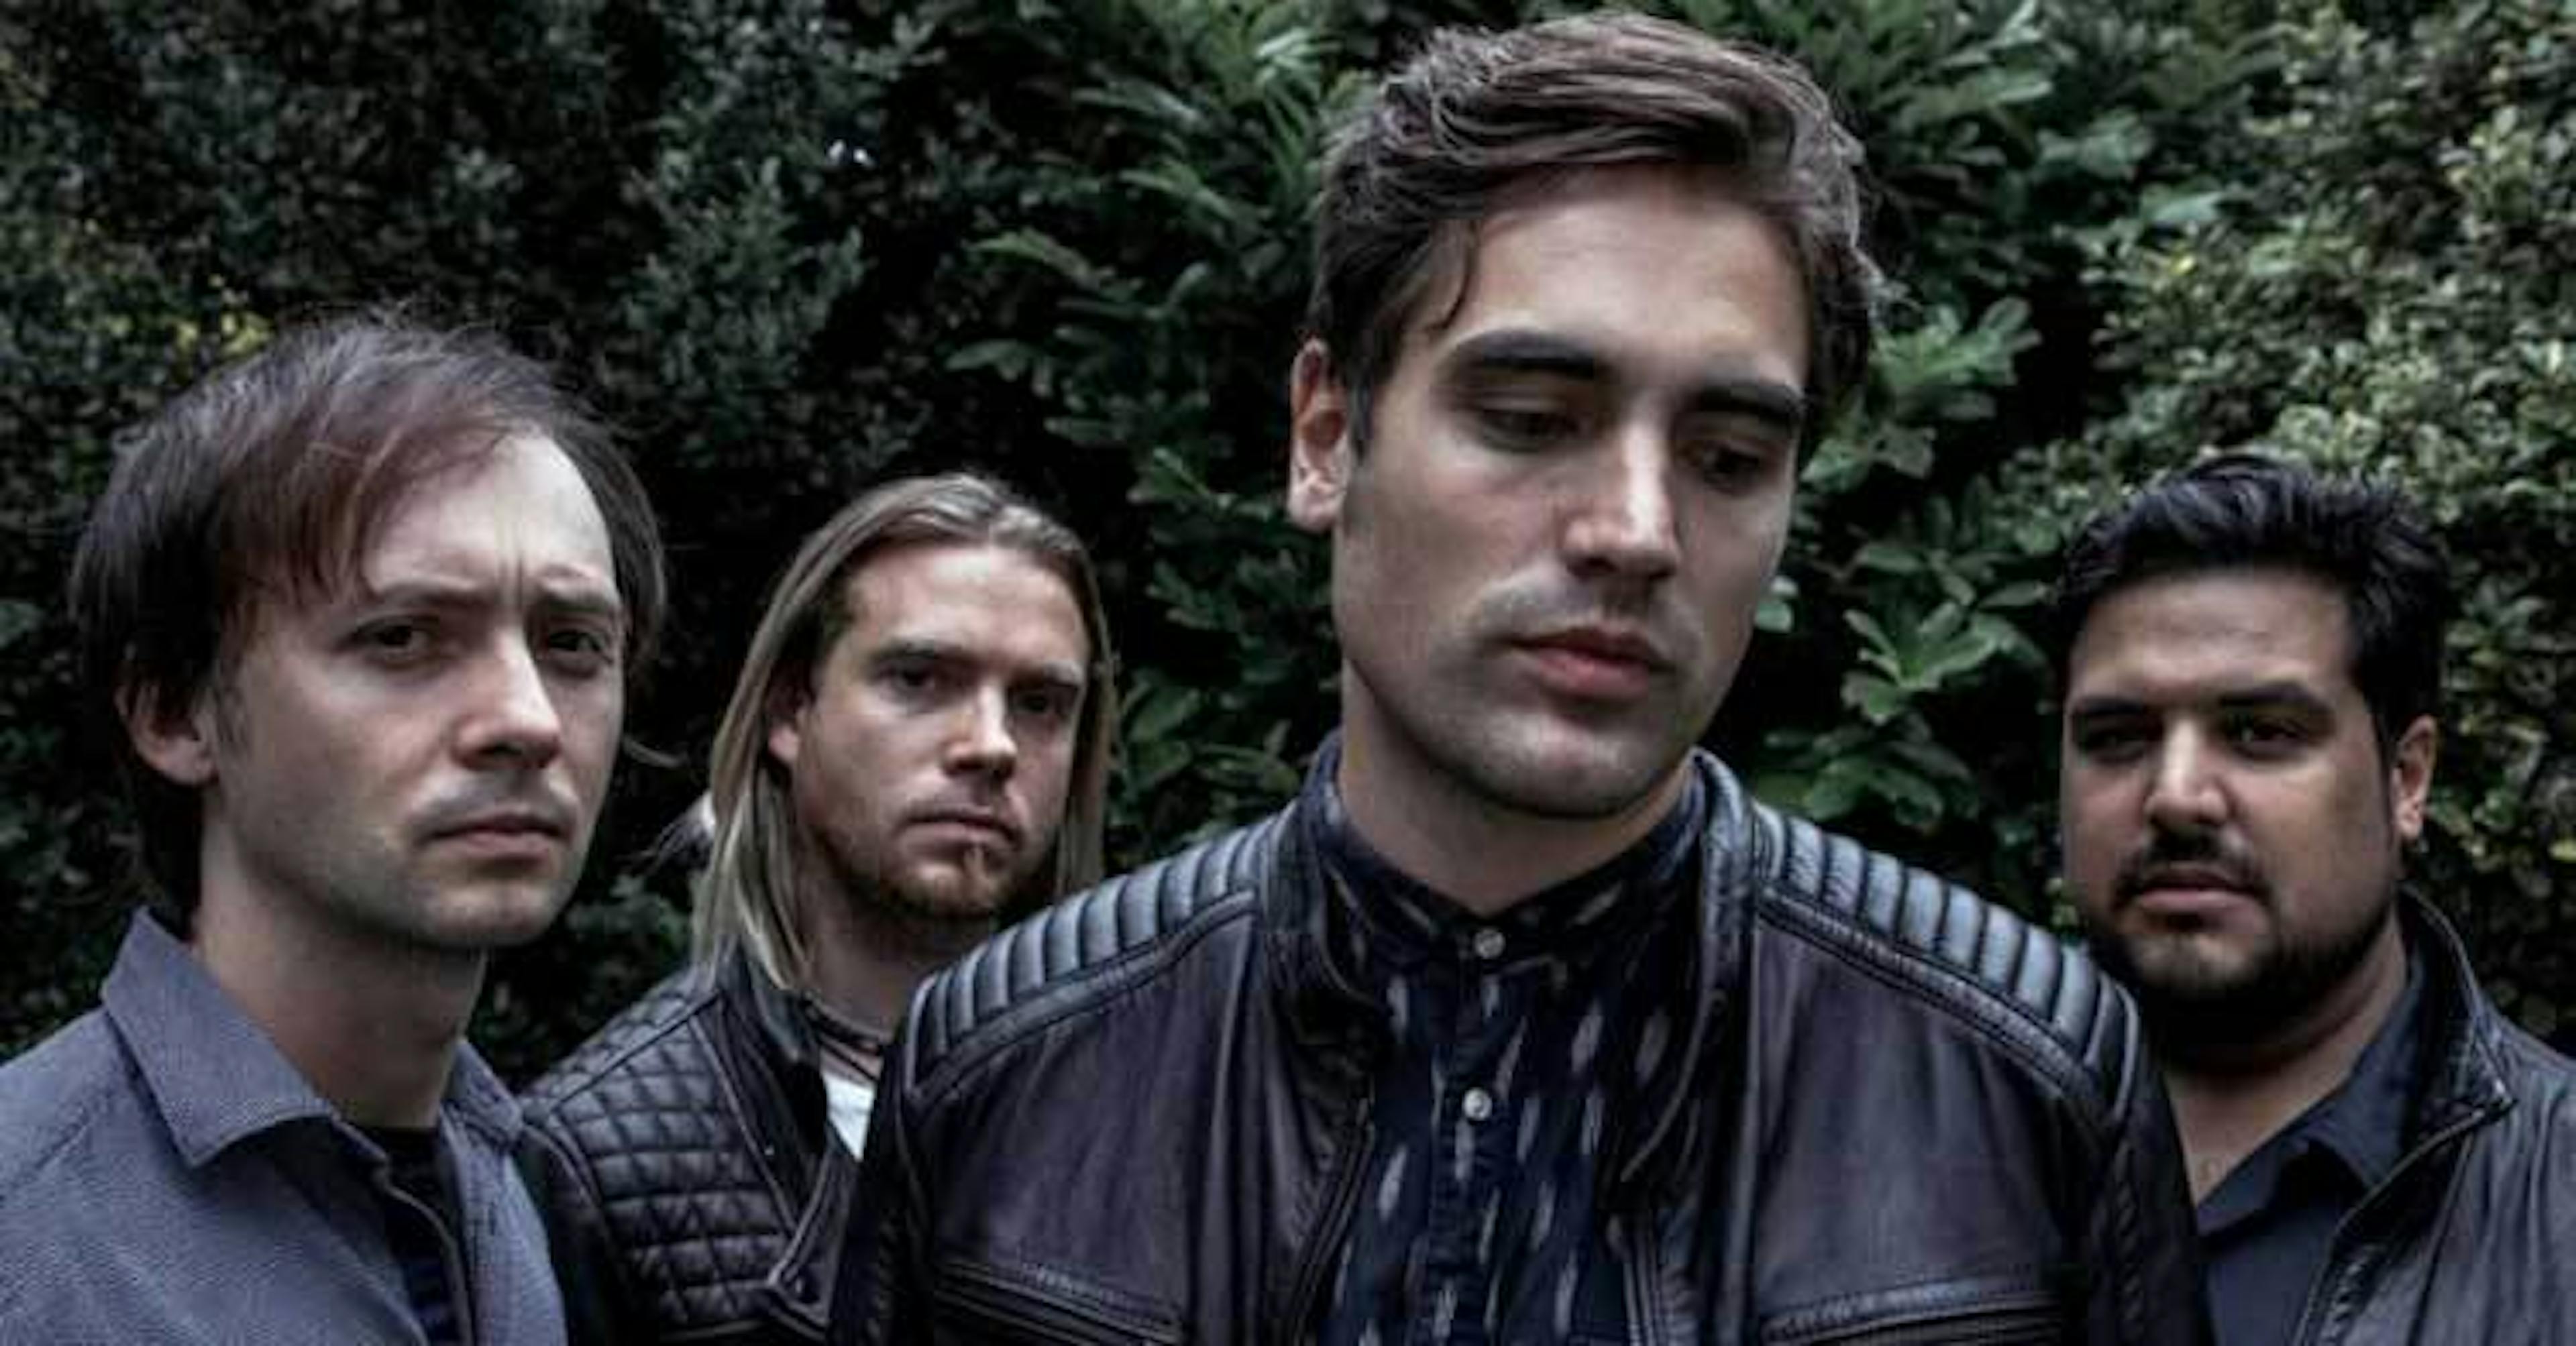 Fightstar Drop New Song, Sink With The Snakes